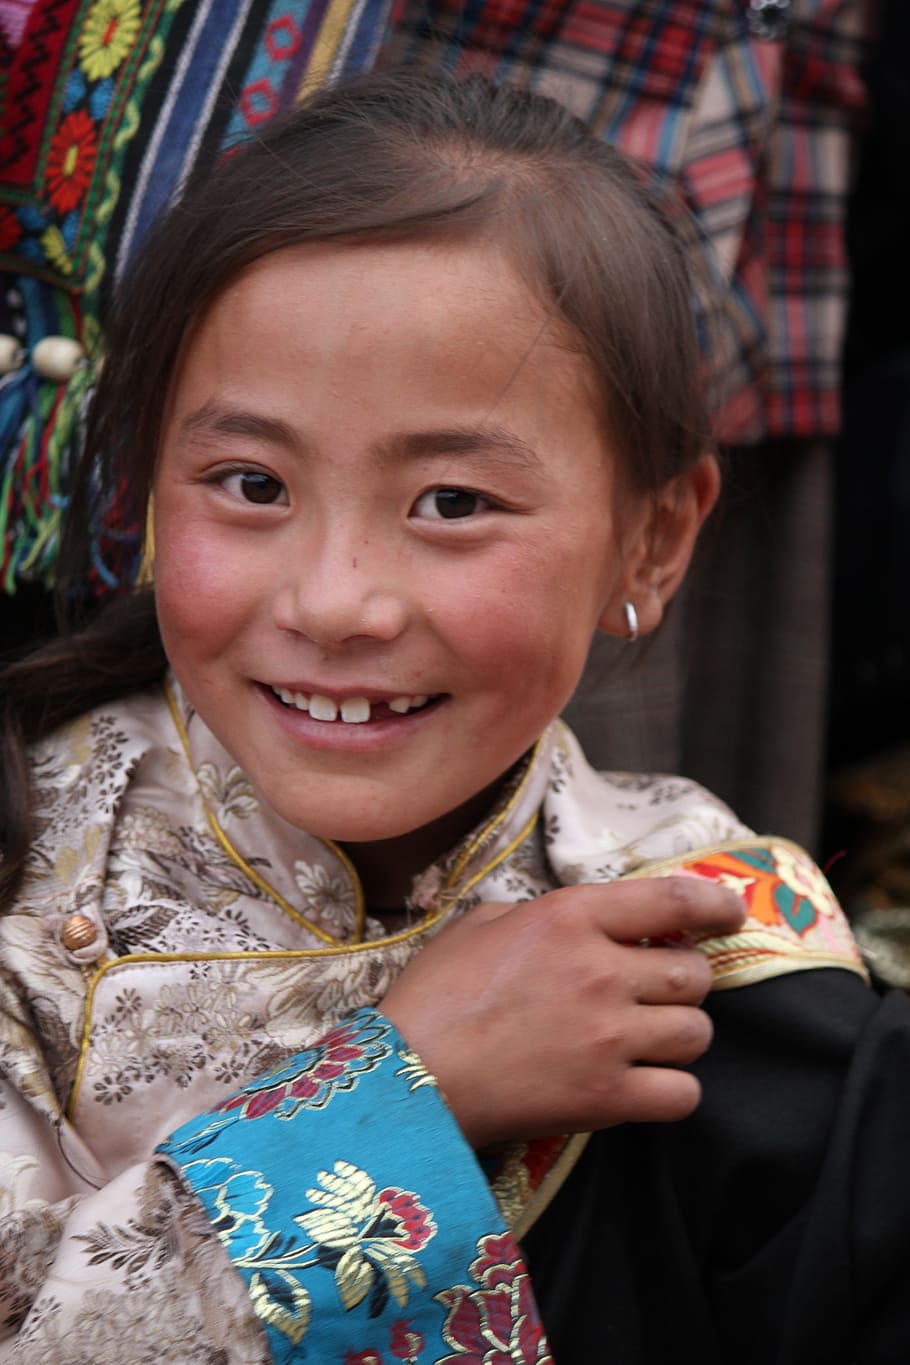 character, tibet ethnic, the little girl, child, childhood, real people, one person, portrait, looking at camera, lifestyles